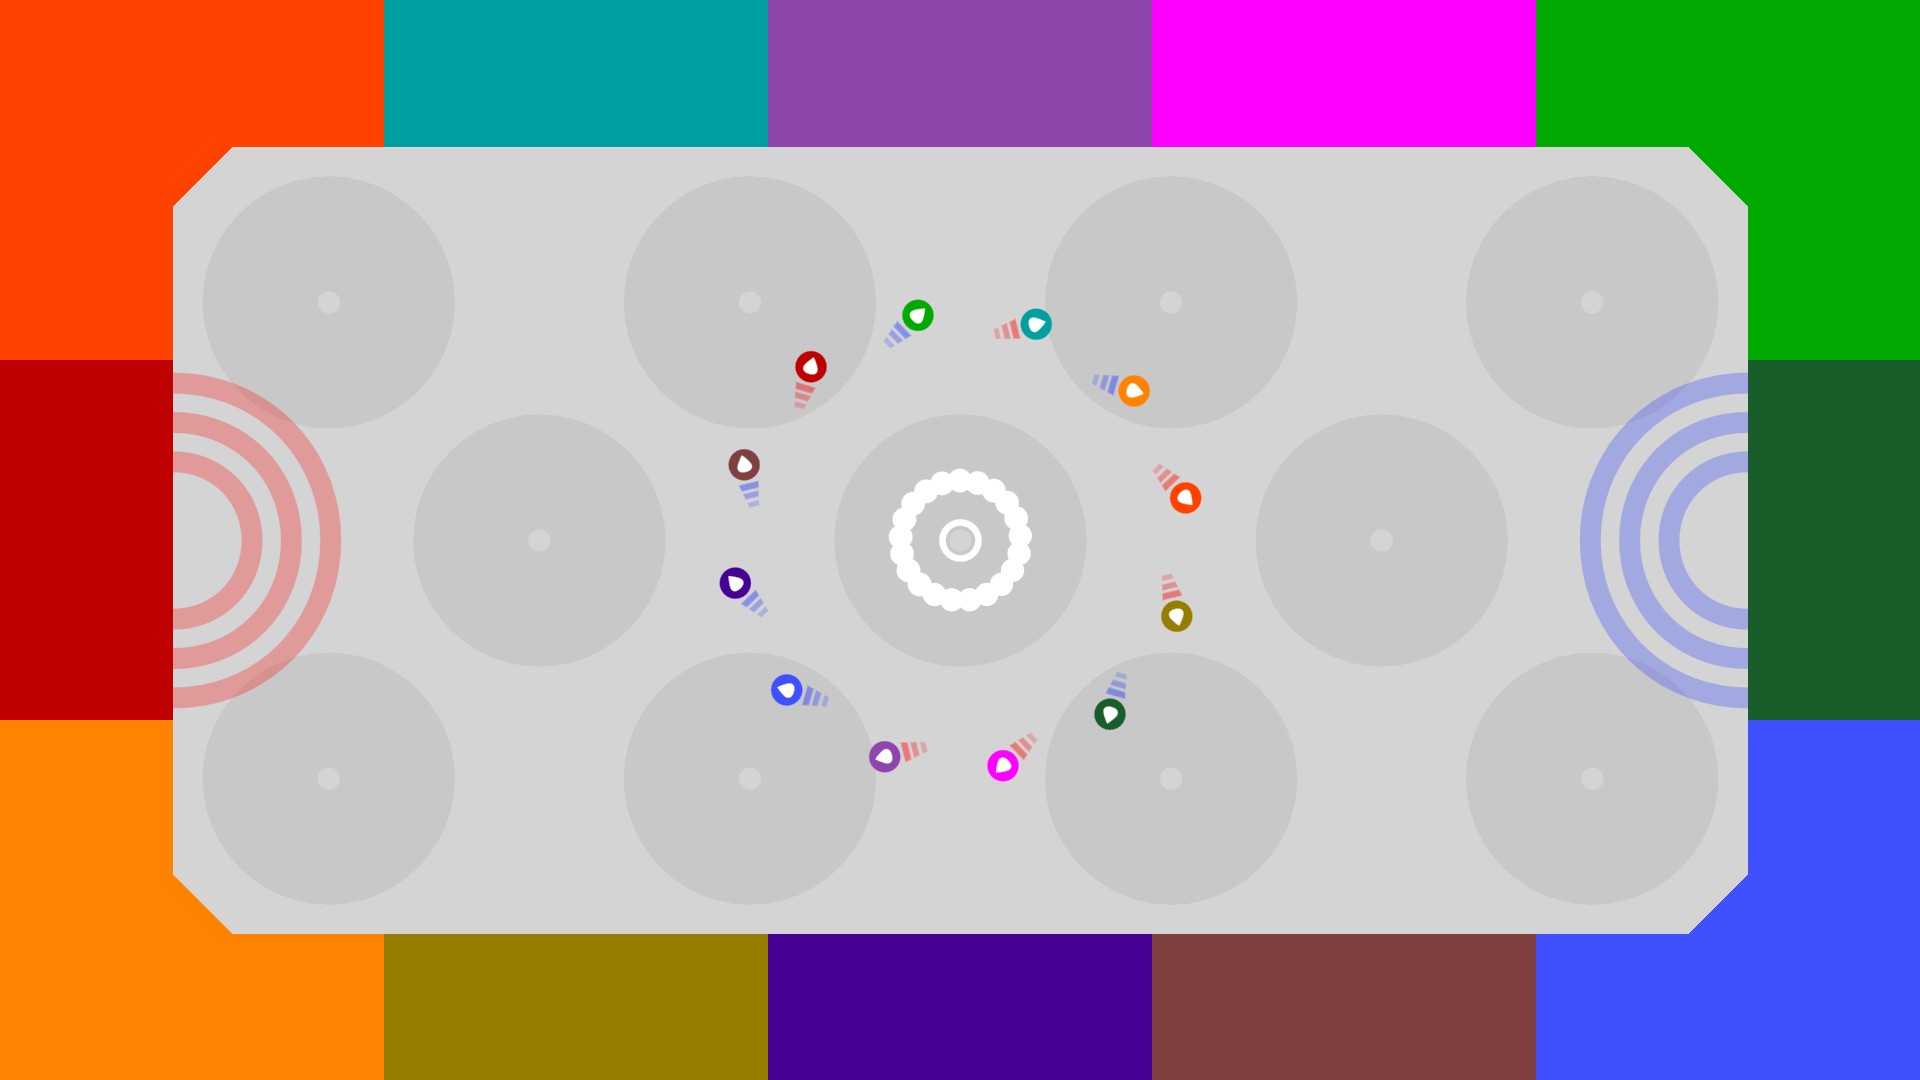 12 orbits ◦ local multiplayer for 2, 3, 4, 5, 6... 12 players ◦ Free